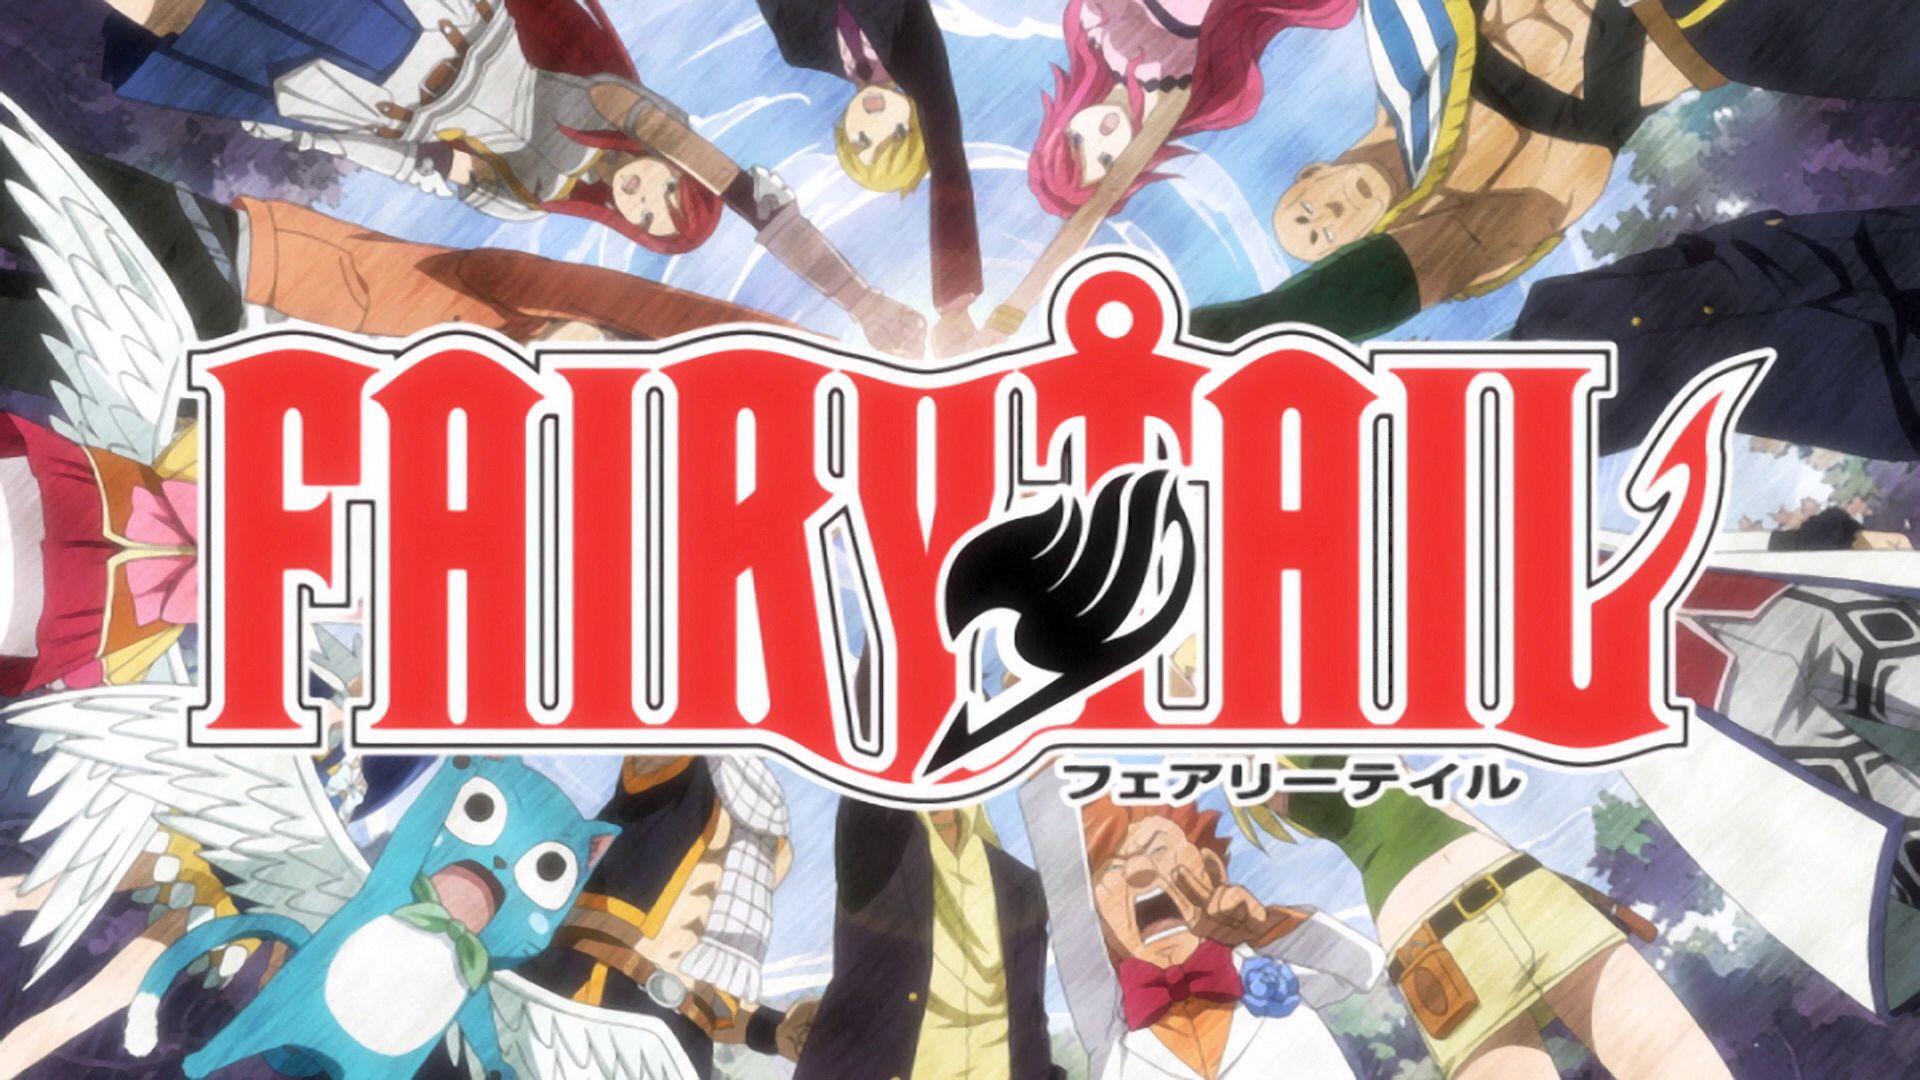 Final Season of FAIRY TAIL Officially Announced for Fall 2018